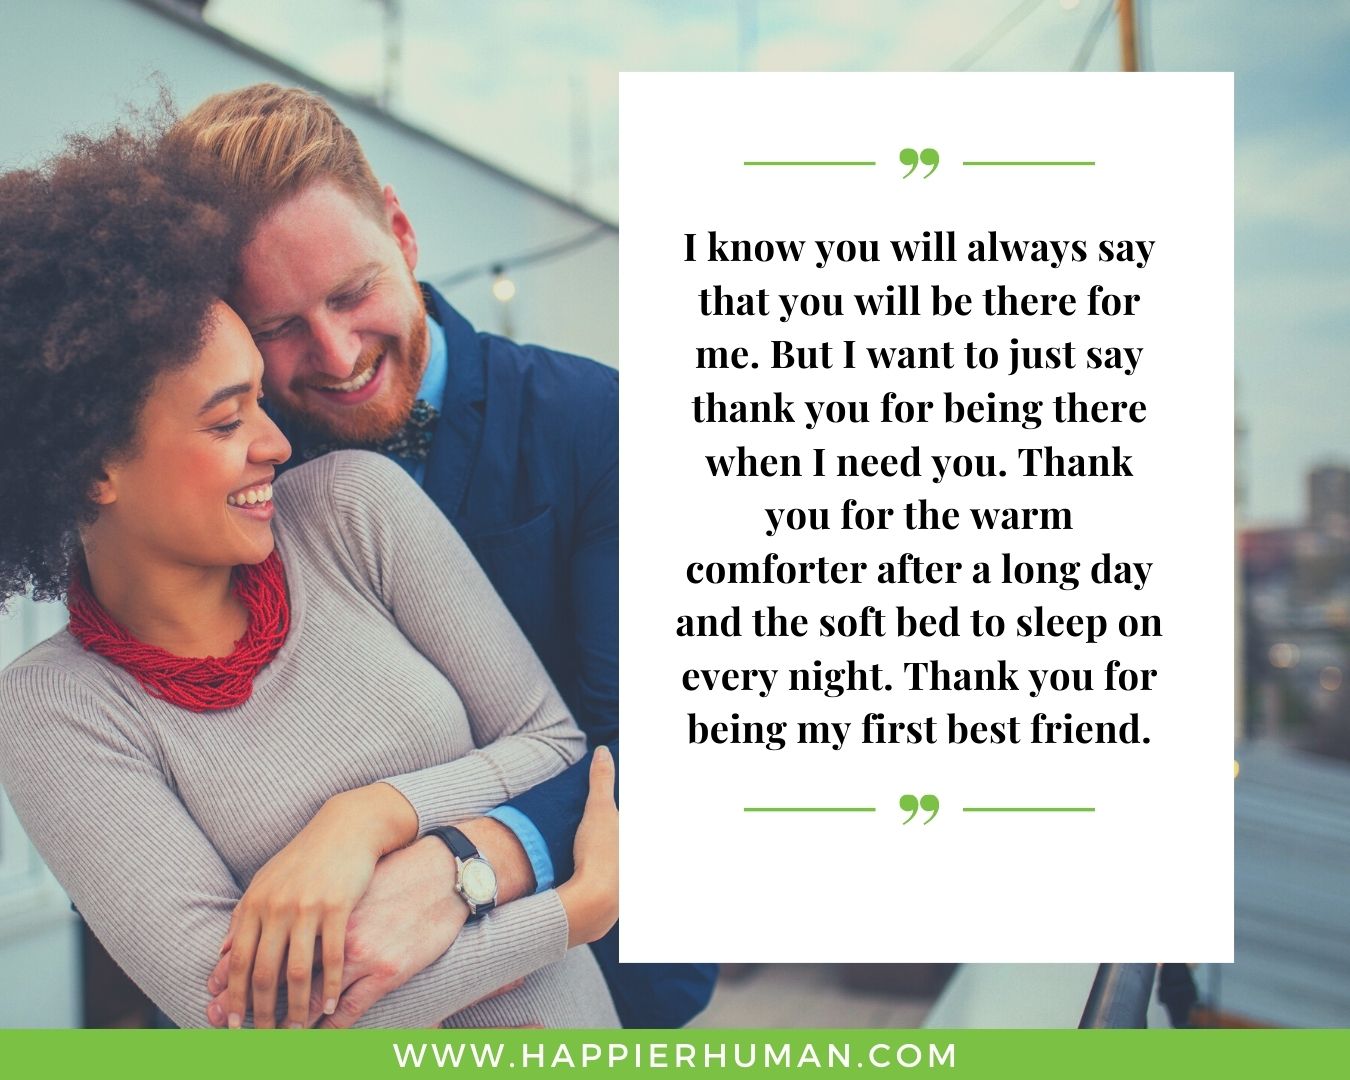 I’m Here for You Quotes - “I know you will always say that you will be there for me. But I want to just say thank you for being there when I need you. Thank you for the warm comforter after a long day and the soft bed to sleep on every night. Thank you for being my first best friend.”